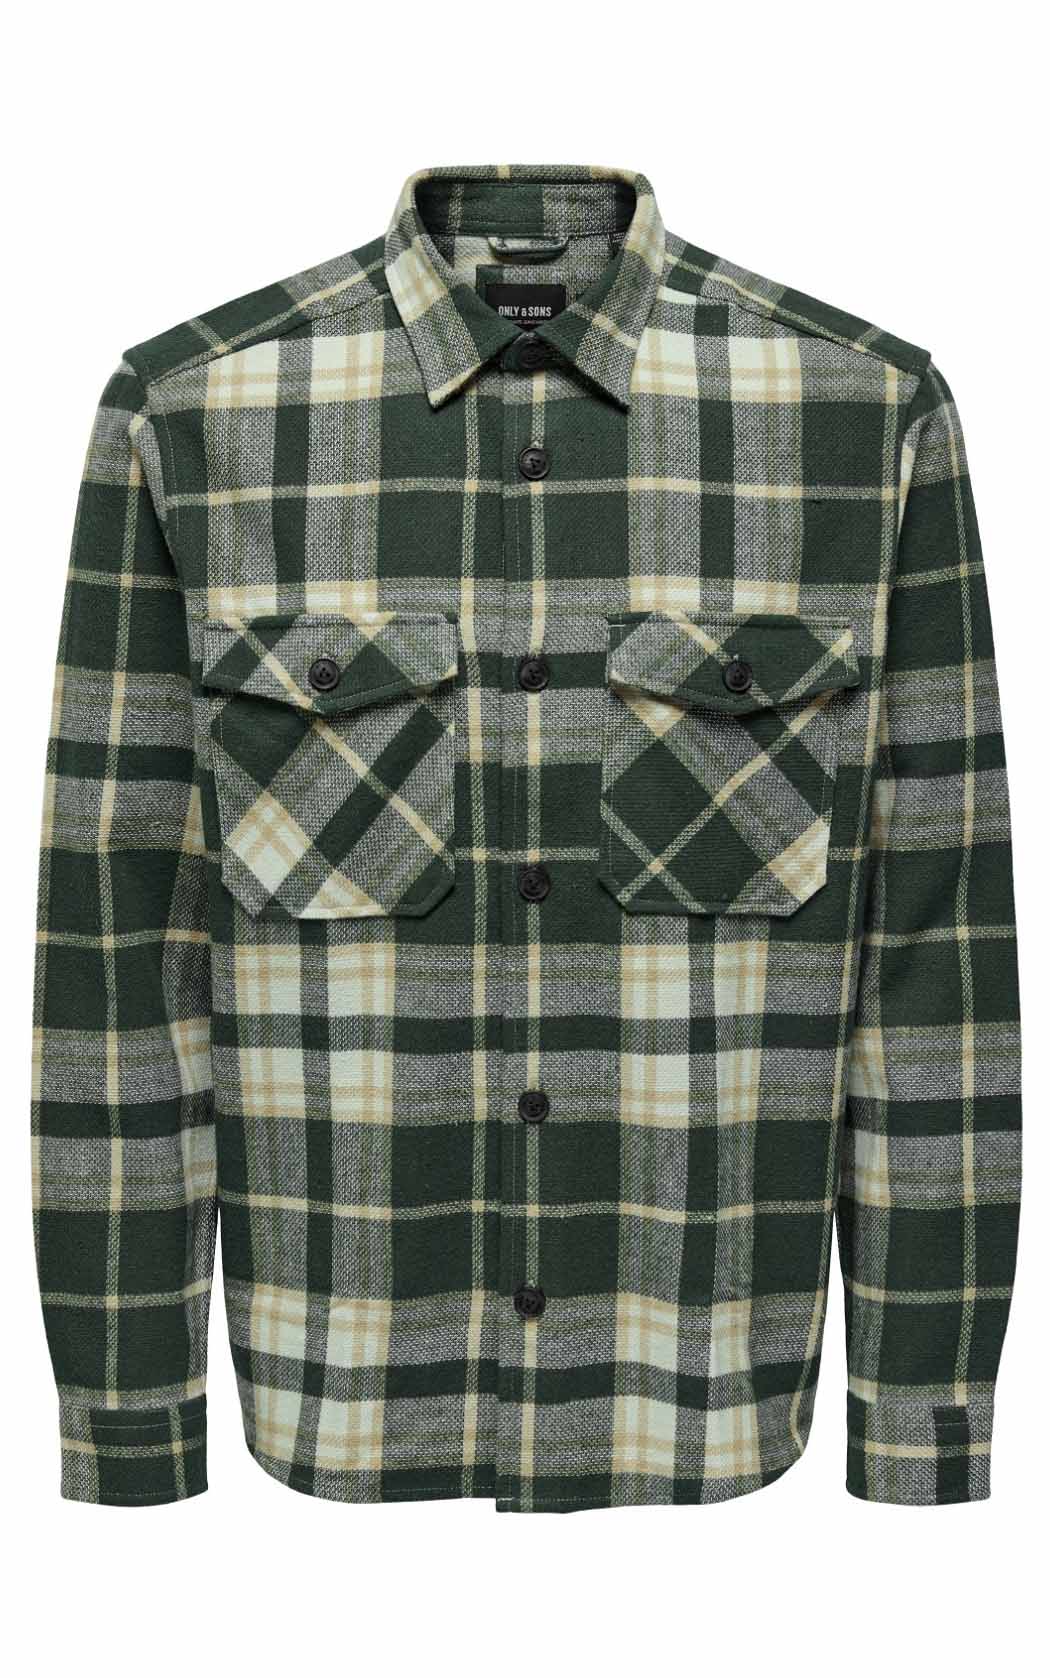 Milo Life Over Shirt in Lush Meadow Check